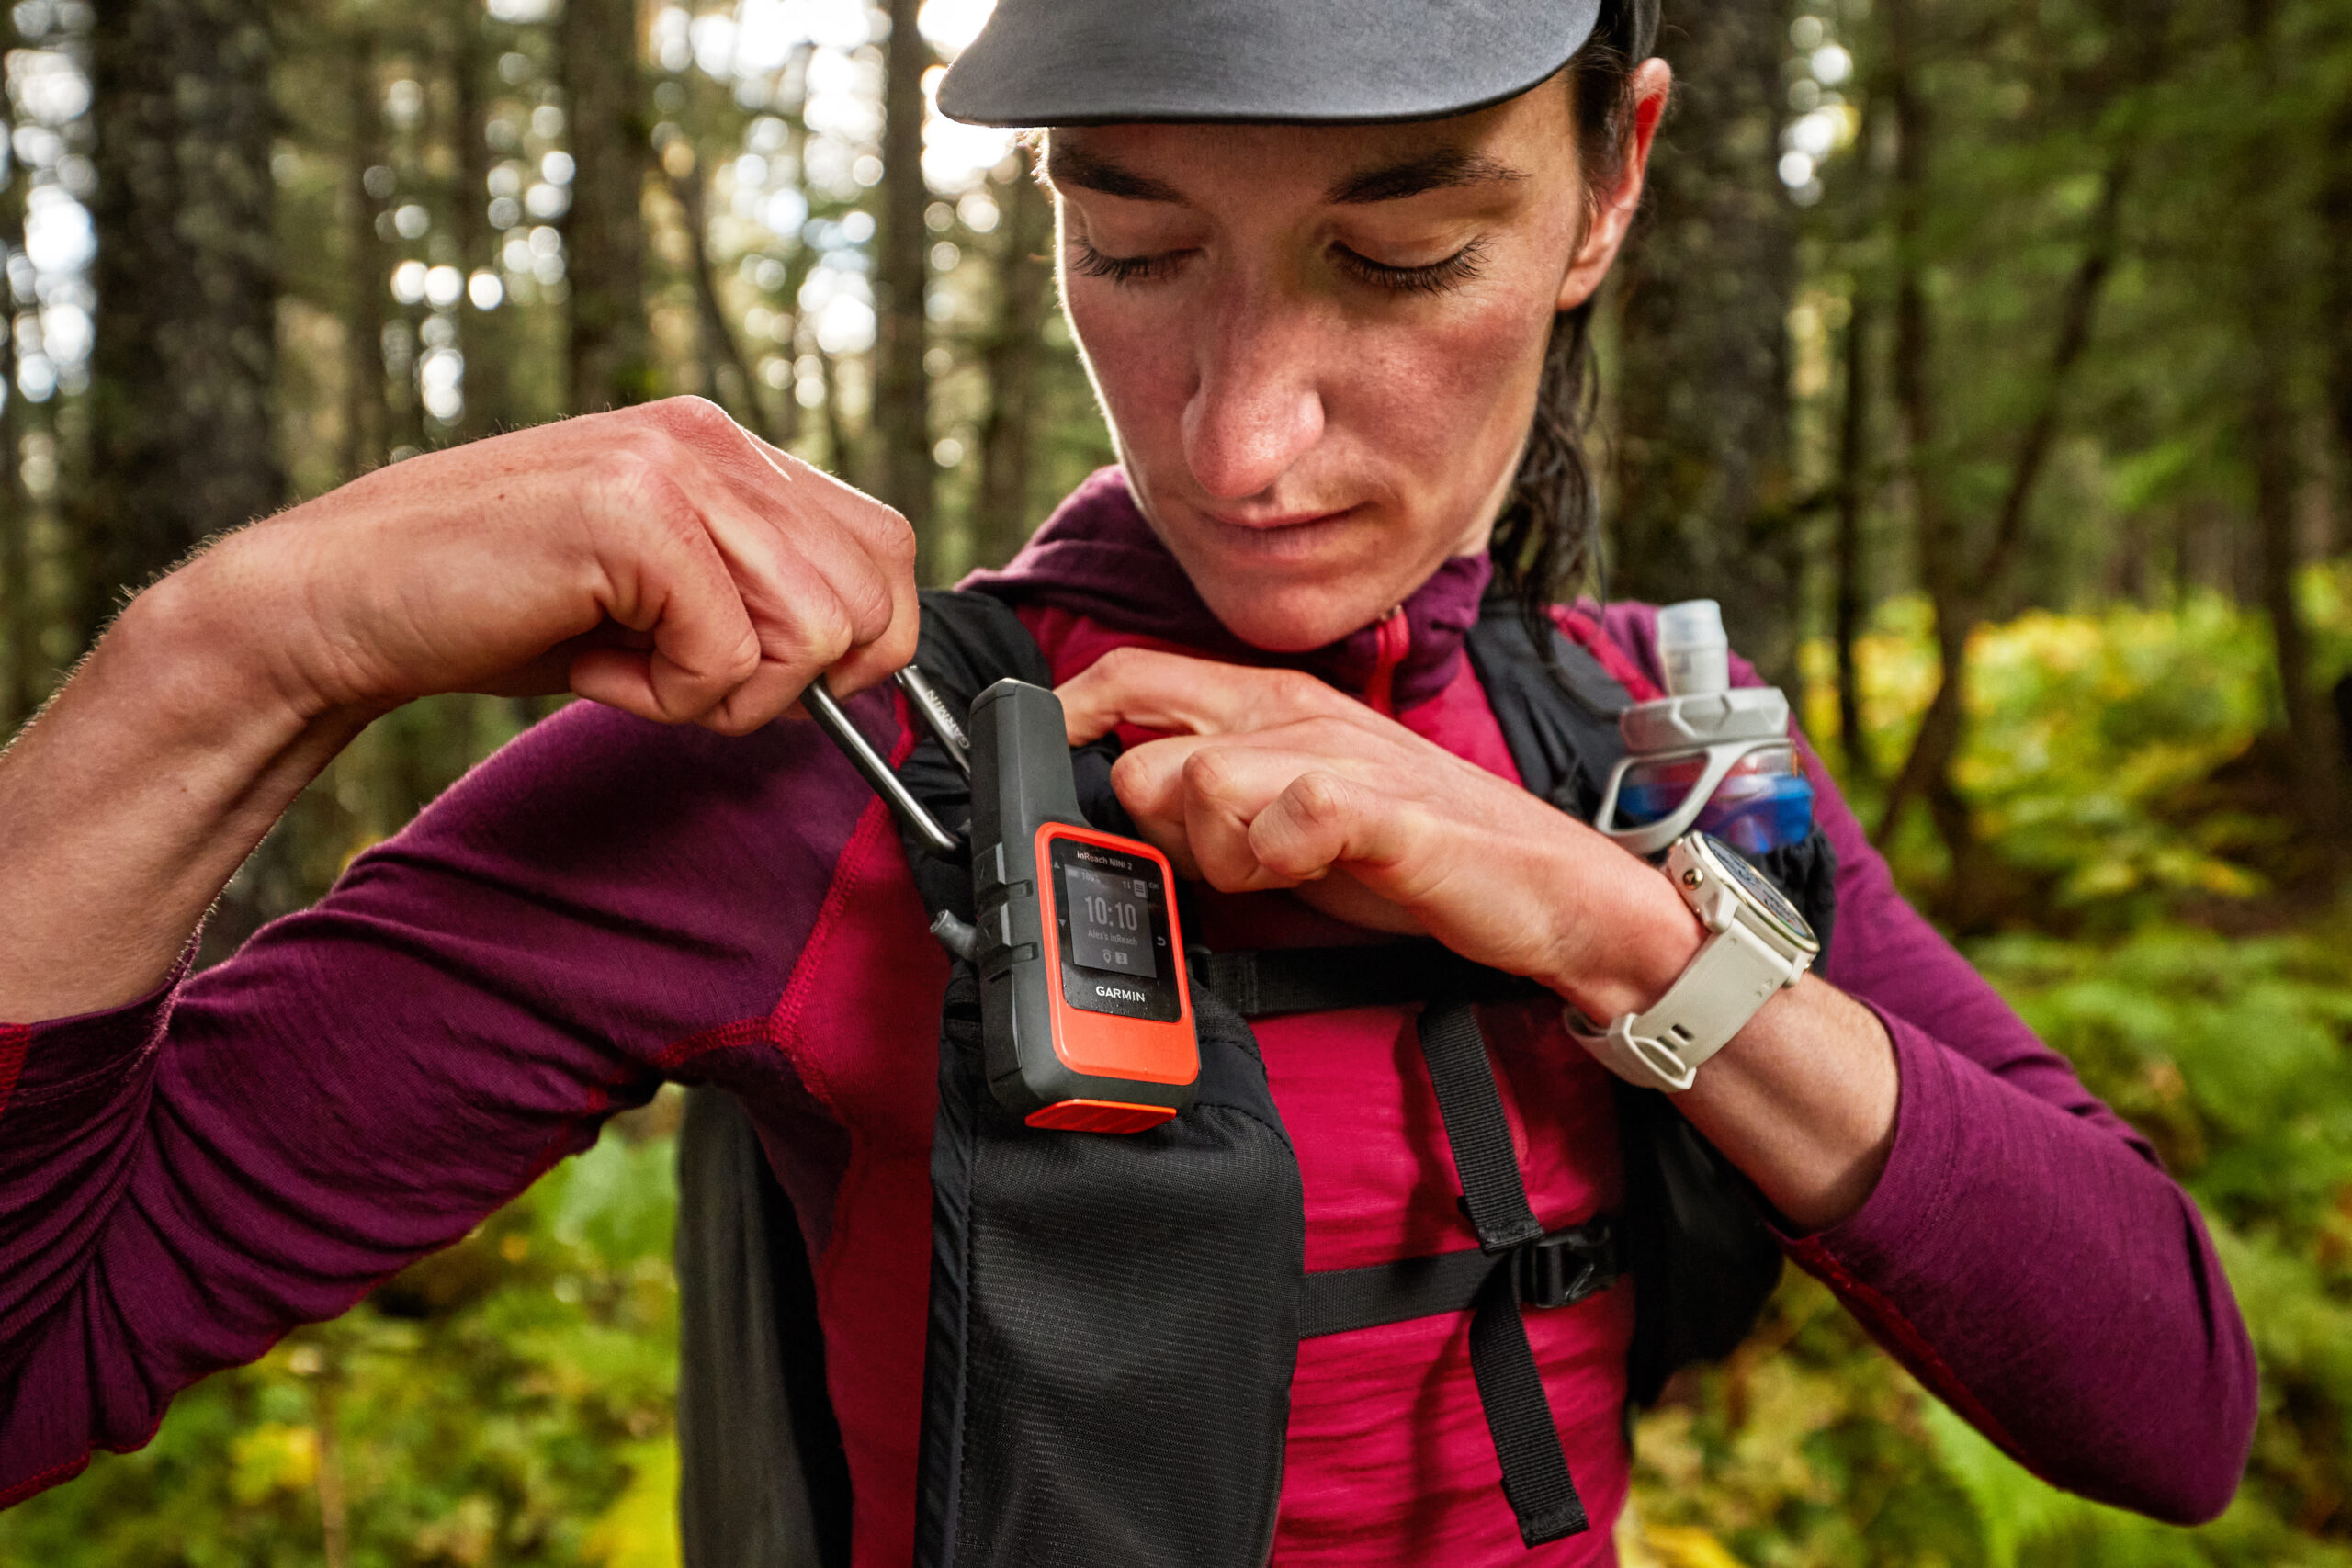 A woman have an Garmin inReach mini 2 Satellite Communicator with her during her outdoor activity. She also wears a Garmin outdoor watch on her wrist.